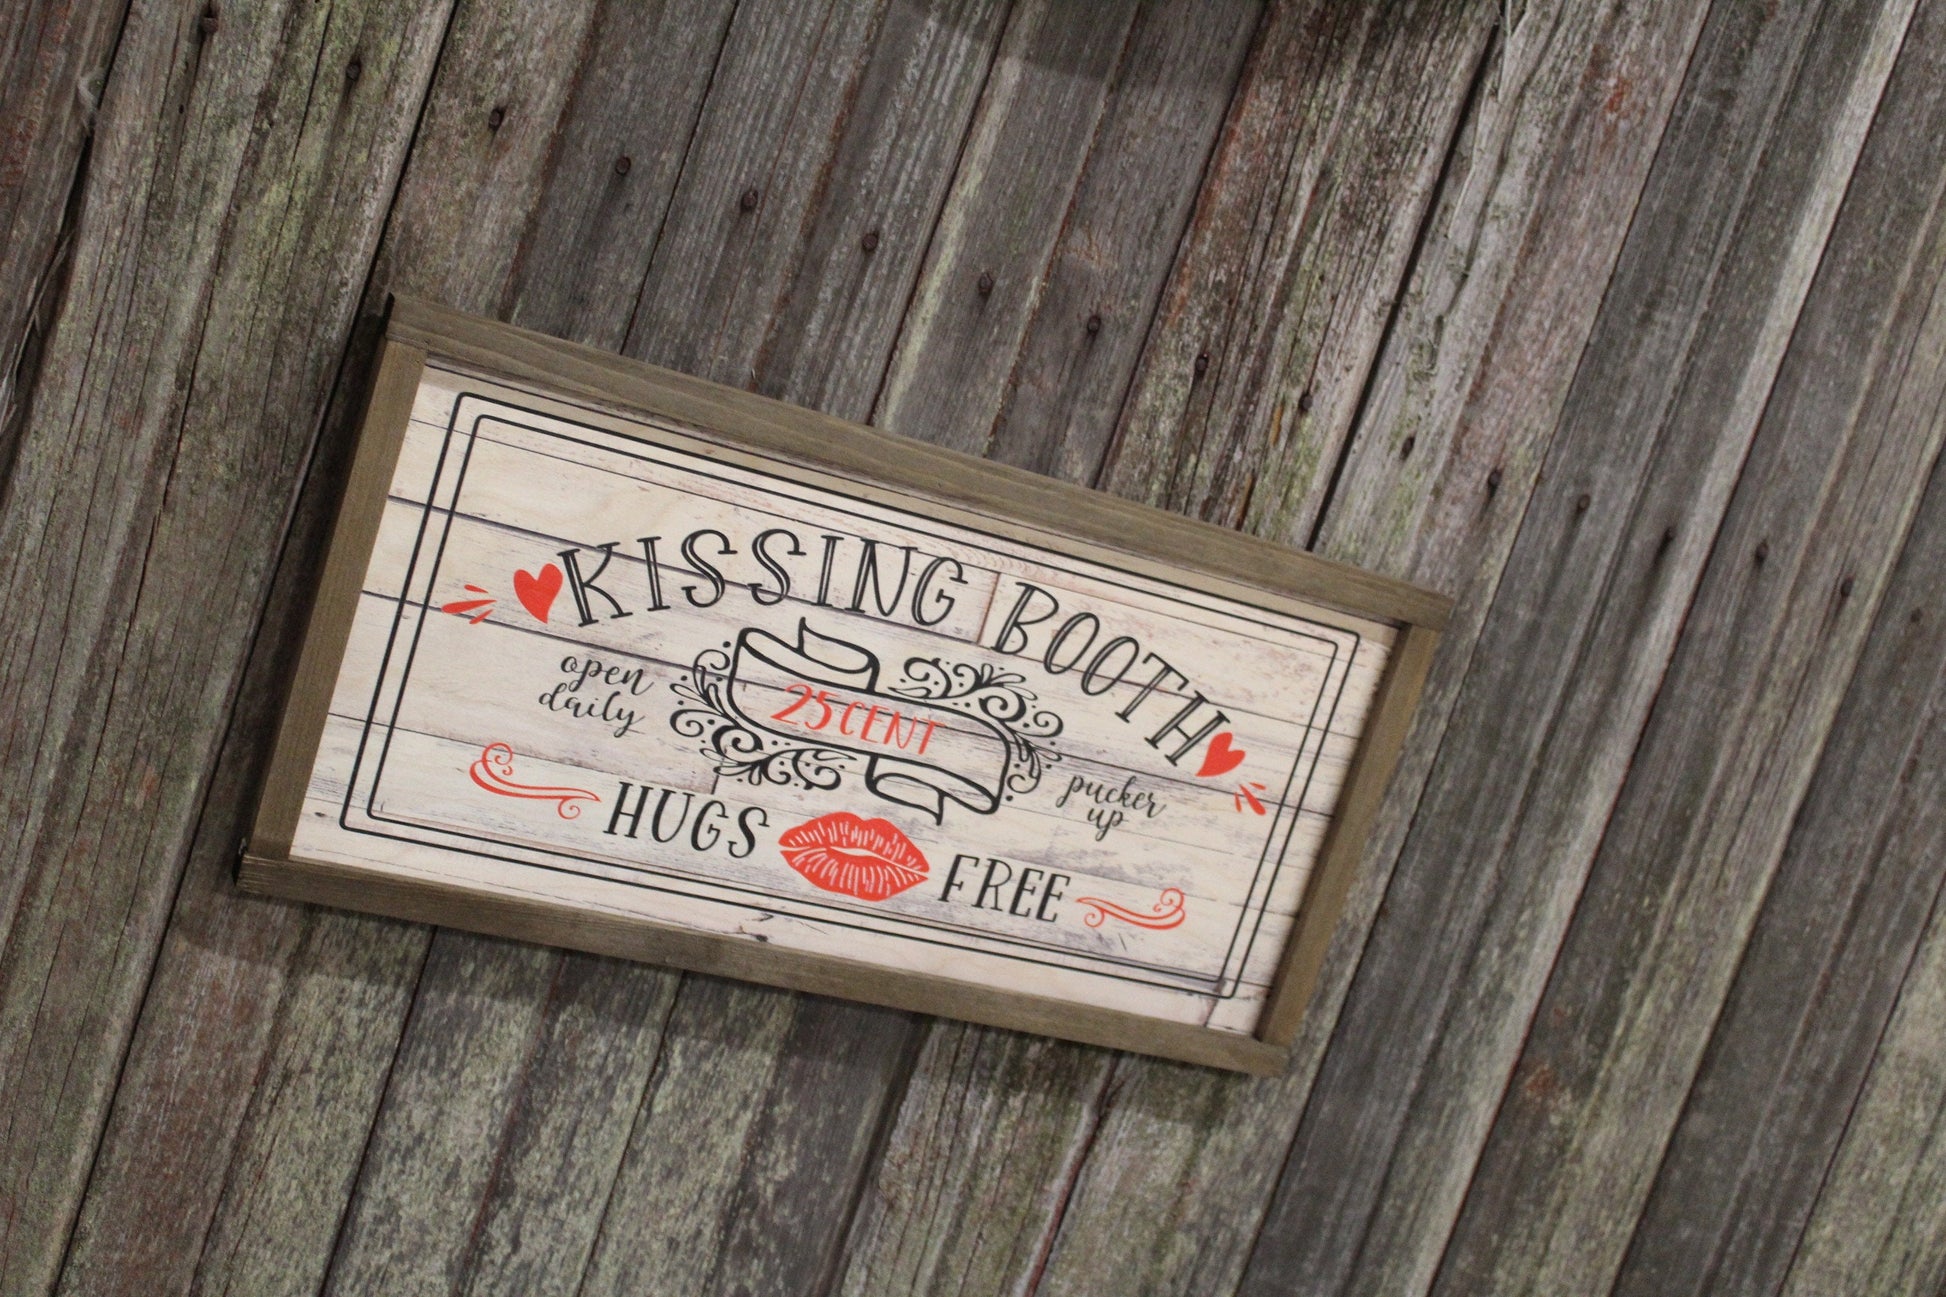 Valentine Kissing Booth Wood Sign Pucker Up Large Sweetest Day 25 Cents Red Shiplap Hugs Free Framed Wall Art Farmhouse Primitive Rustic